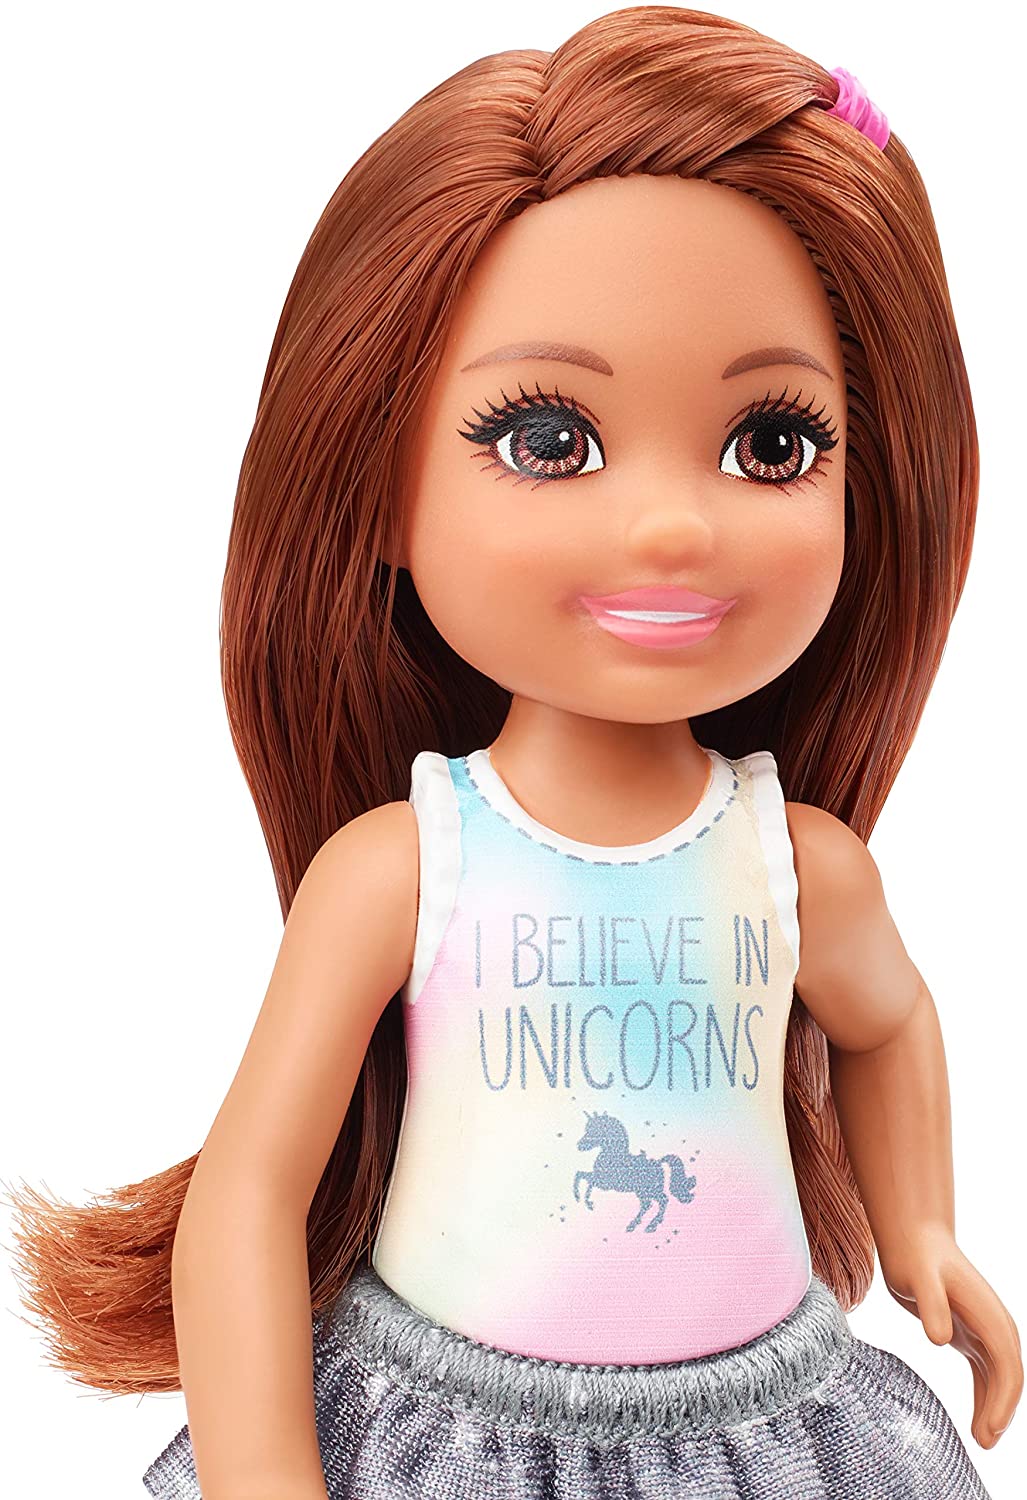 Barbie Club Chelsea Doll (6-inch Brunette) Wearing Unicorn-Themed Graphic and Star Skirt, for